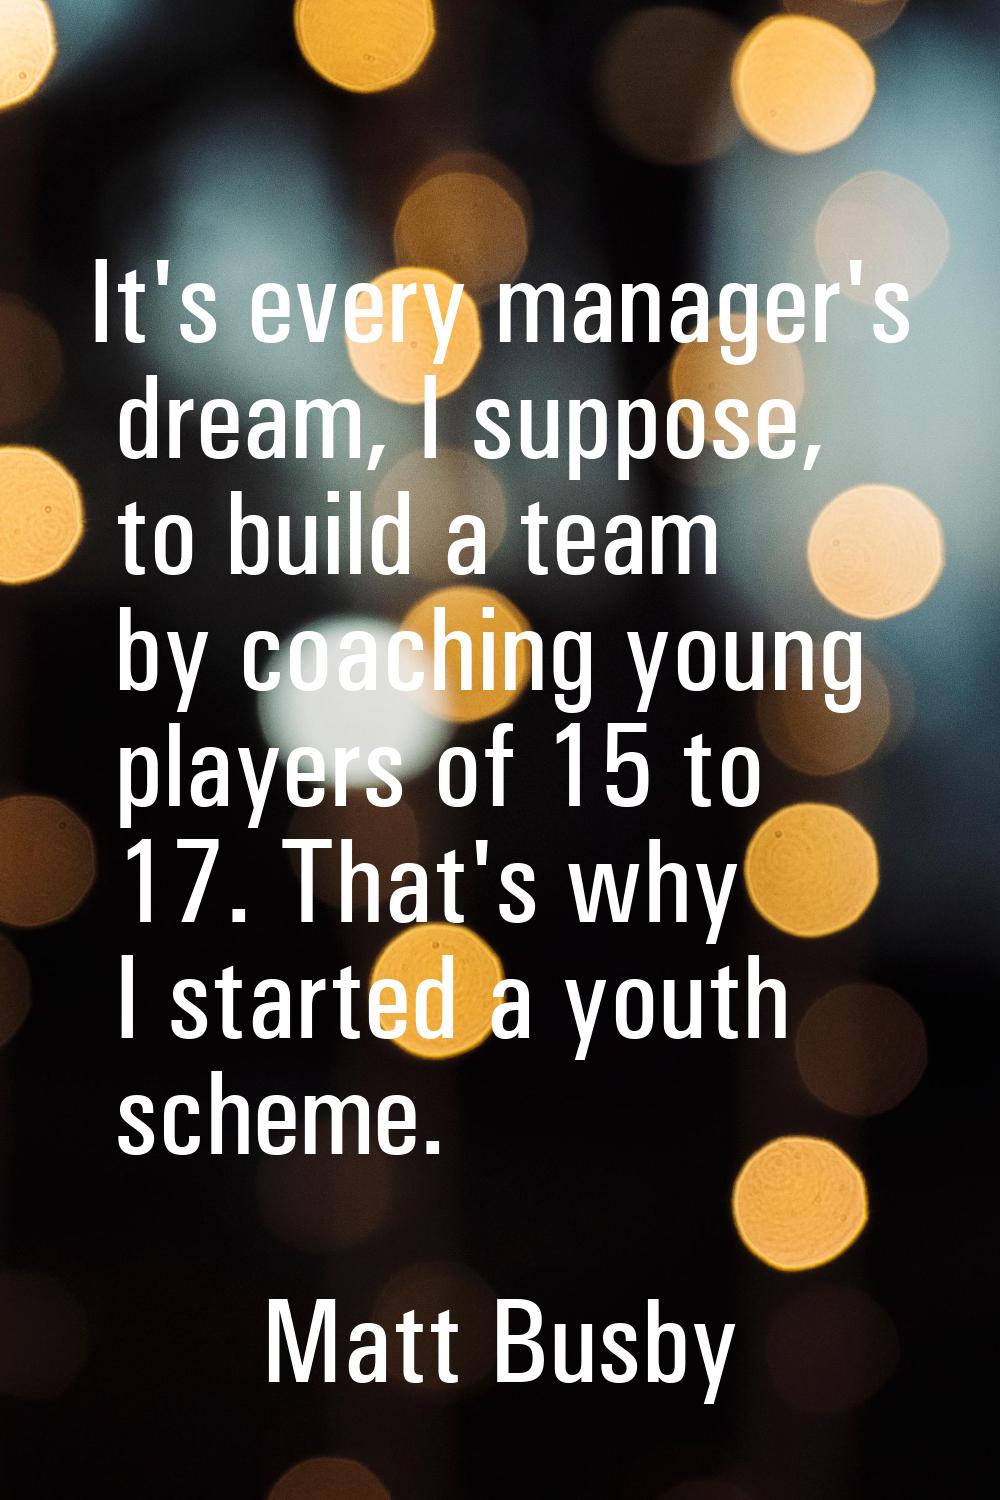 It's every manager's dream, I suppose, to build a team by coaching young players of 15 to 17. That'